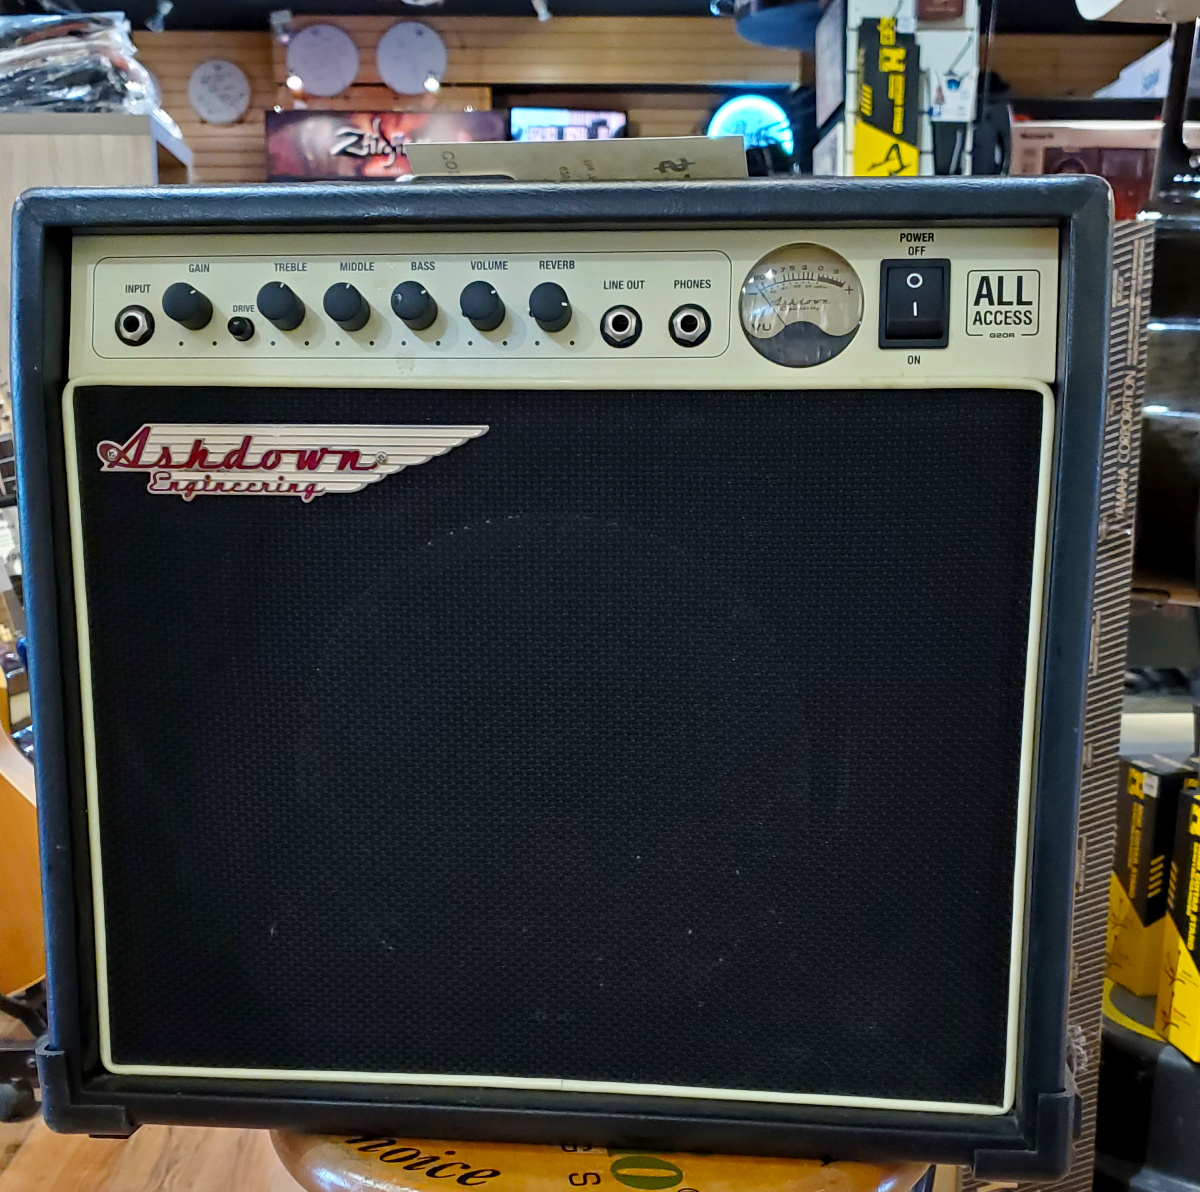 USED Ashdown G20R Amplifier - CONSIGNMENT